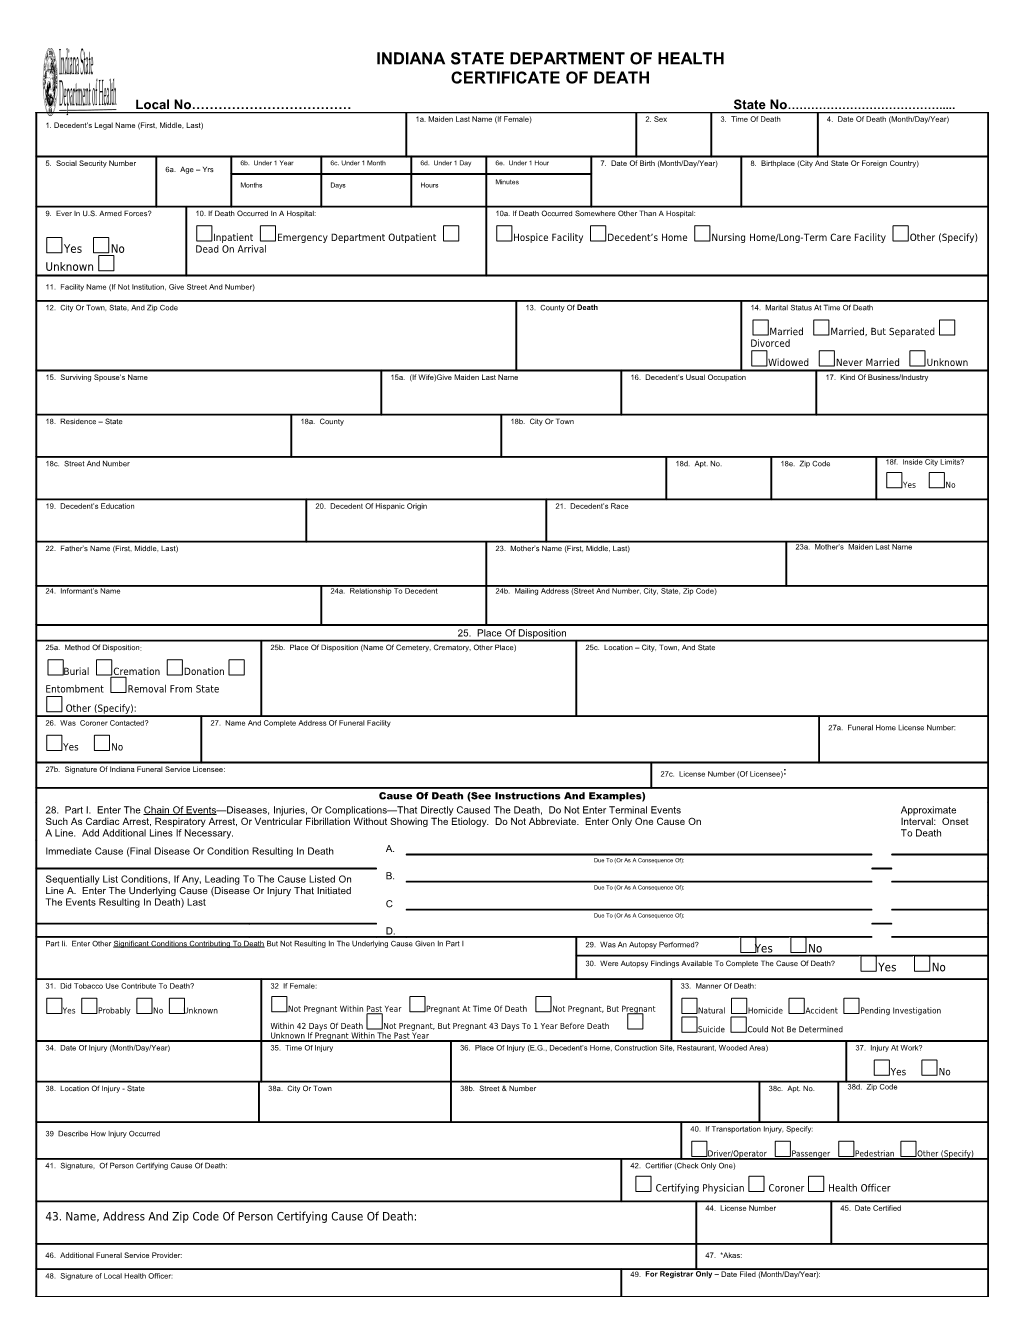 Indiana State Department of Health - Certificate of Death